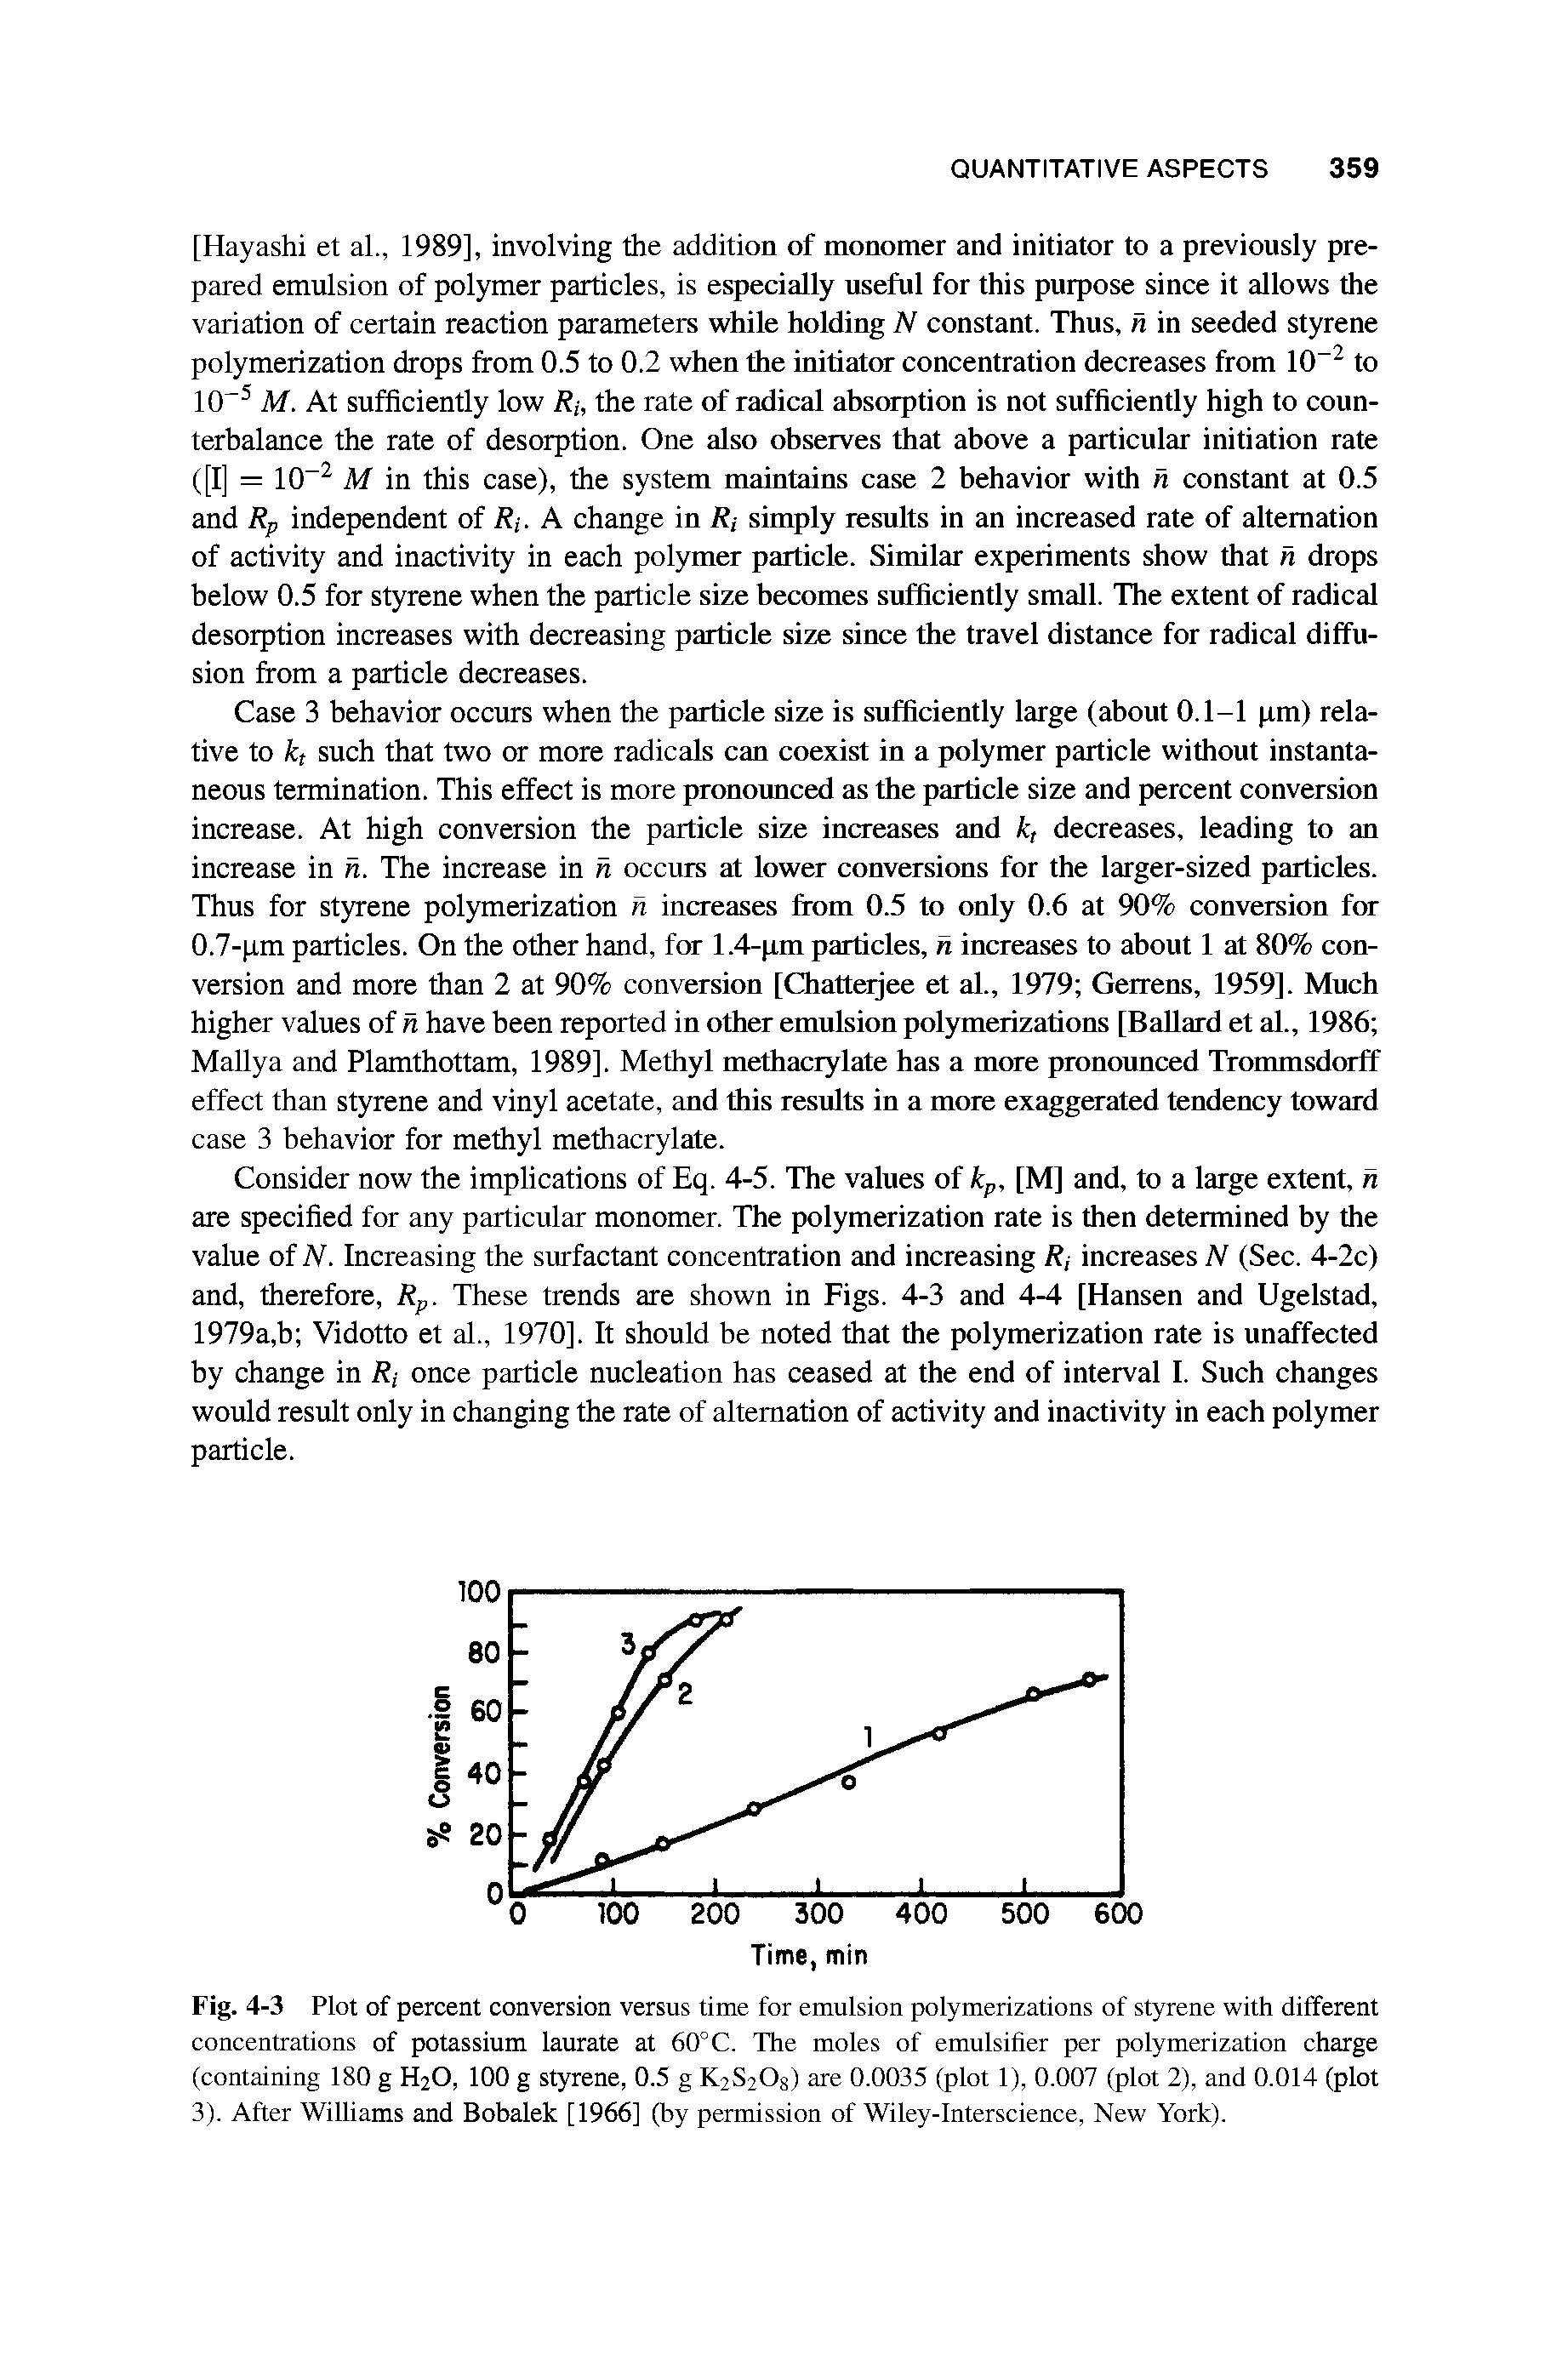 Fig. 4-3 Plot of percent conversion versus time for emulsion polymerizations of styrene with different concentrations of potassium laurate at 60° C. The moles of emulsifier per polymerization charge (containing 180 g H2O, 100 g styrene, 0.5 g K2S2O8) are 0.0035 (plot 1), 0.007 (plot 2), and 0.014 (plot 3). After Williams and Bobalek [1966] (by permission of Wiley-Interscience, New York).